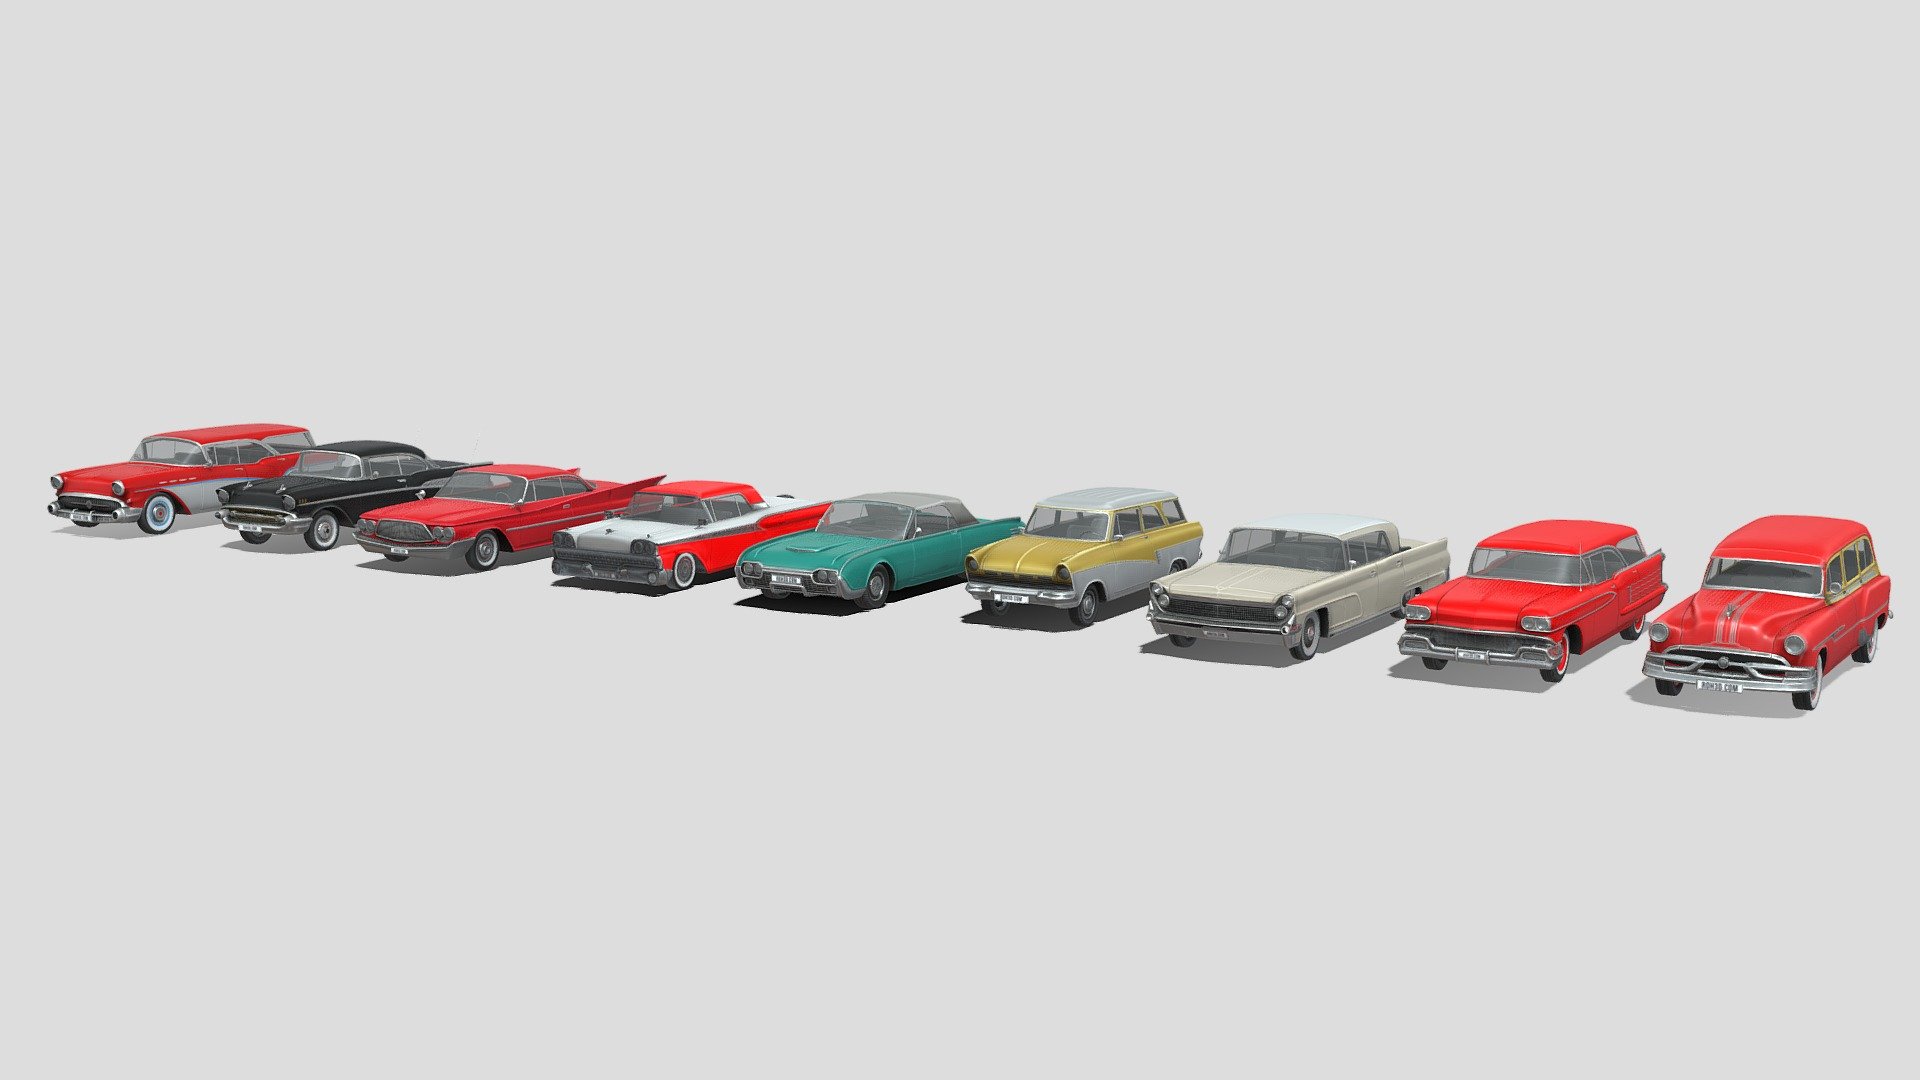 This models pack contain 9 different cars, with nice and clean geometry.

Features : 




Low poly cars, each cars only have about 7k polygons. 

It’s included PSD file, so you can easily change the color (Using Photoshop). 

Nice detail, thanks to the baked-textures in 4K size.

Cars included in this pack: 




Buick Century Caballero Wagon 1957

Chevrolet Bel Air 1957 

Chrysler Saratoga 1960

Ford Crown Victoria 1955

Ford Fairlane 500 Galaxie Skyliner 1959 

Ford Taunus P2 Kombi 1957

Lincoln Mark IV Sedan 1959

Oldsmobile Dynamic 88 Fiesta Holiday SW 1958

Pontiac Chieftain Deluxe Station Wagon 1953

Buying this collection, you will save a large amount of money! - Low Poly Cars Collection 006 - Classic Tailfins - Buy Royalty Free 3D model by ROH3D 3d model